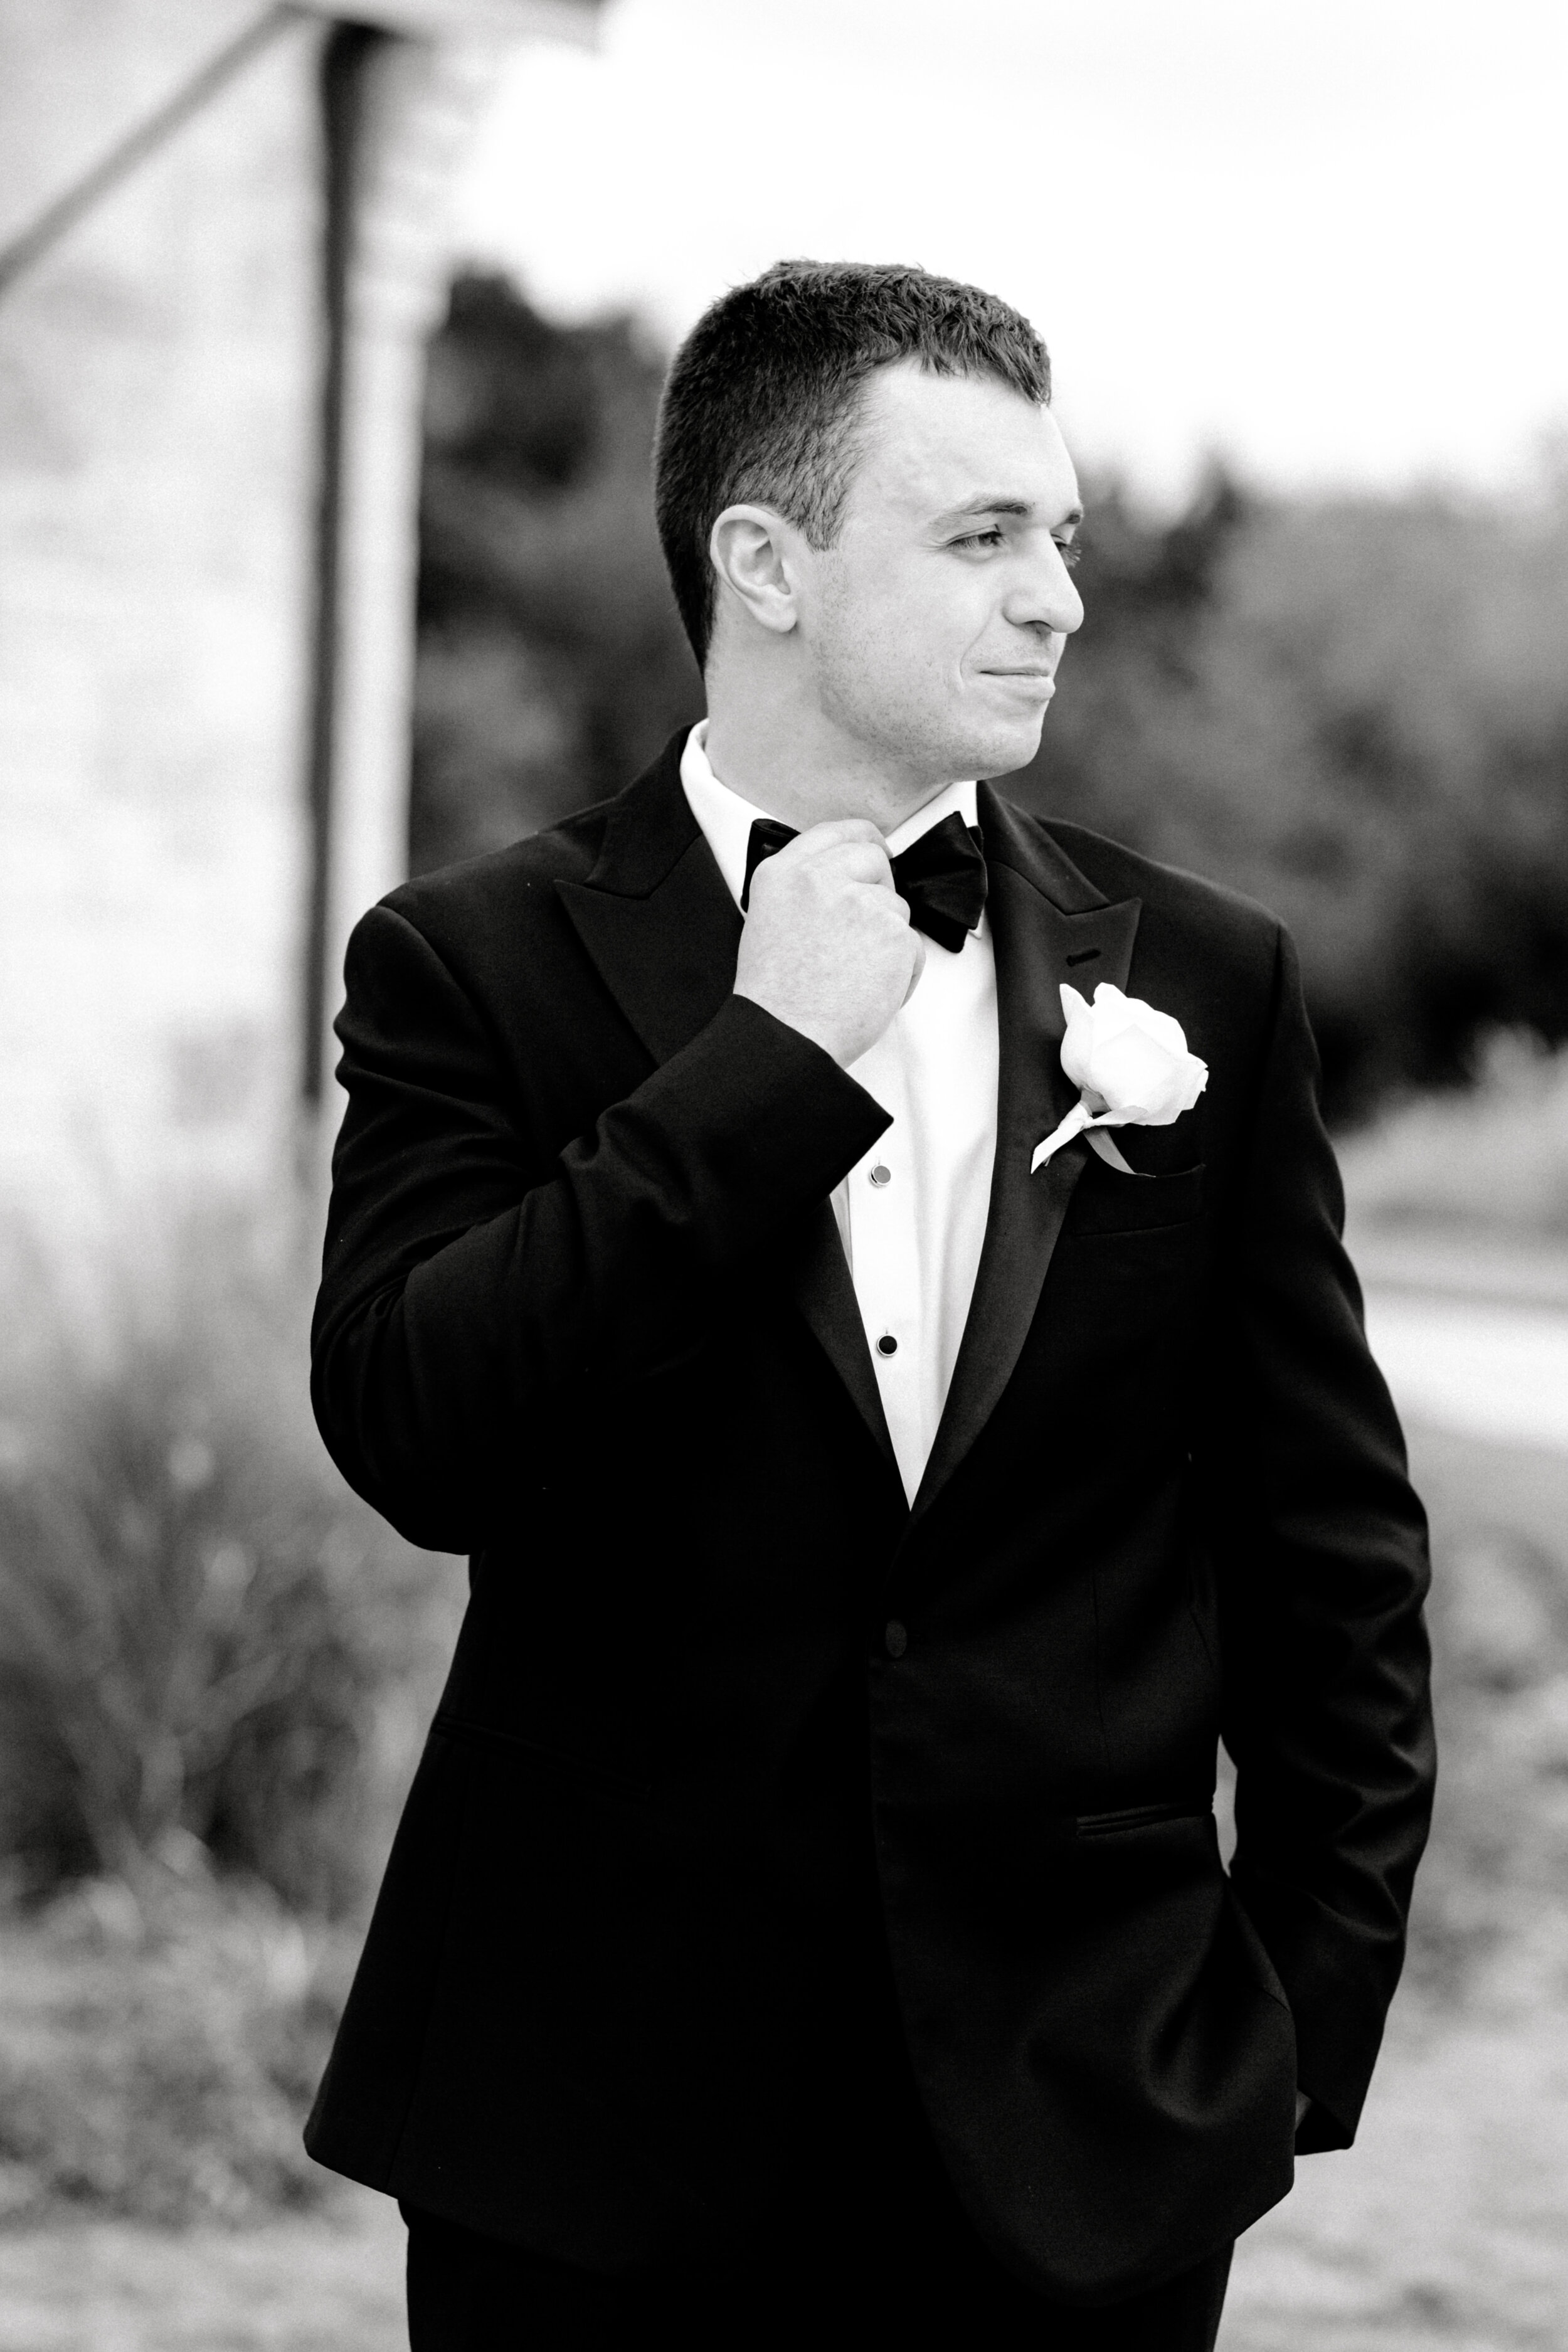 groom getting ready pictures.jpg